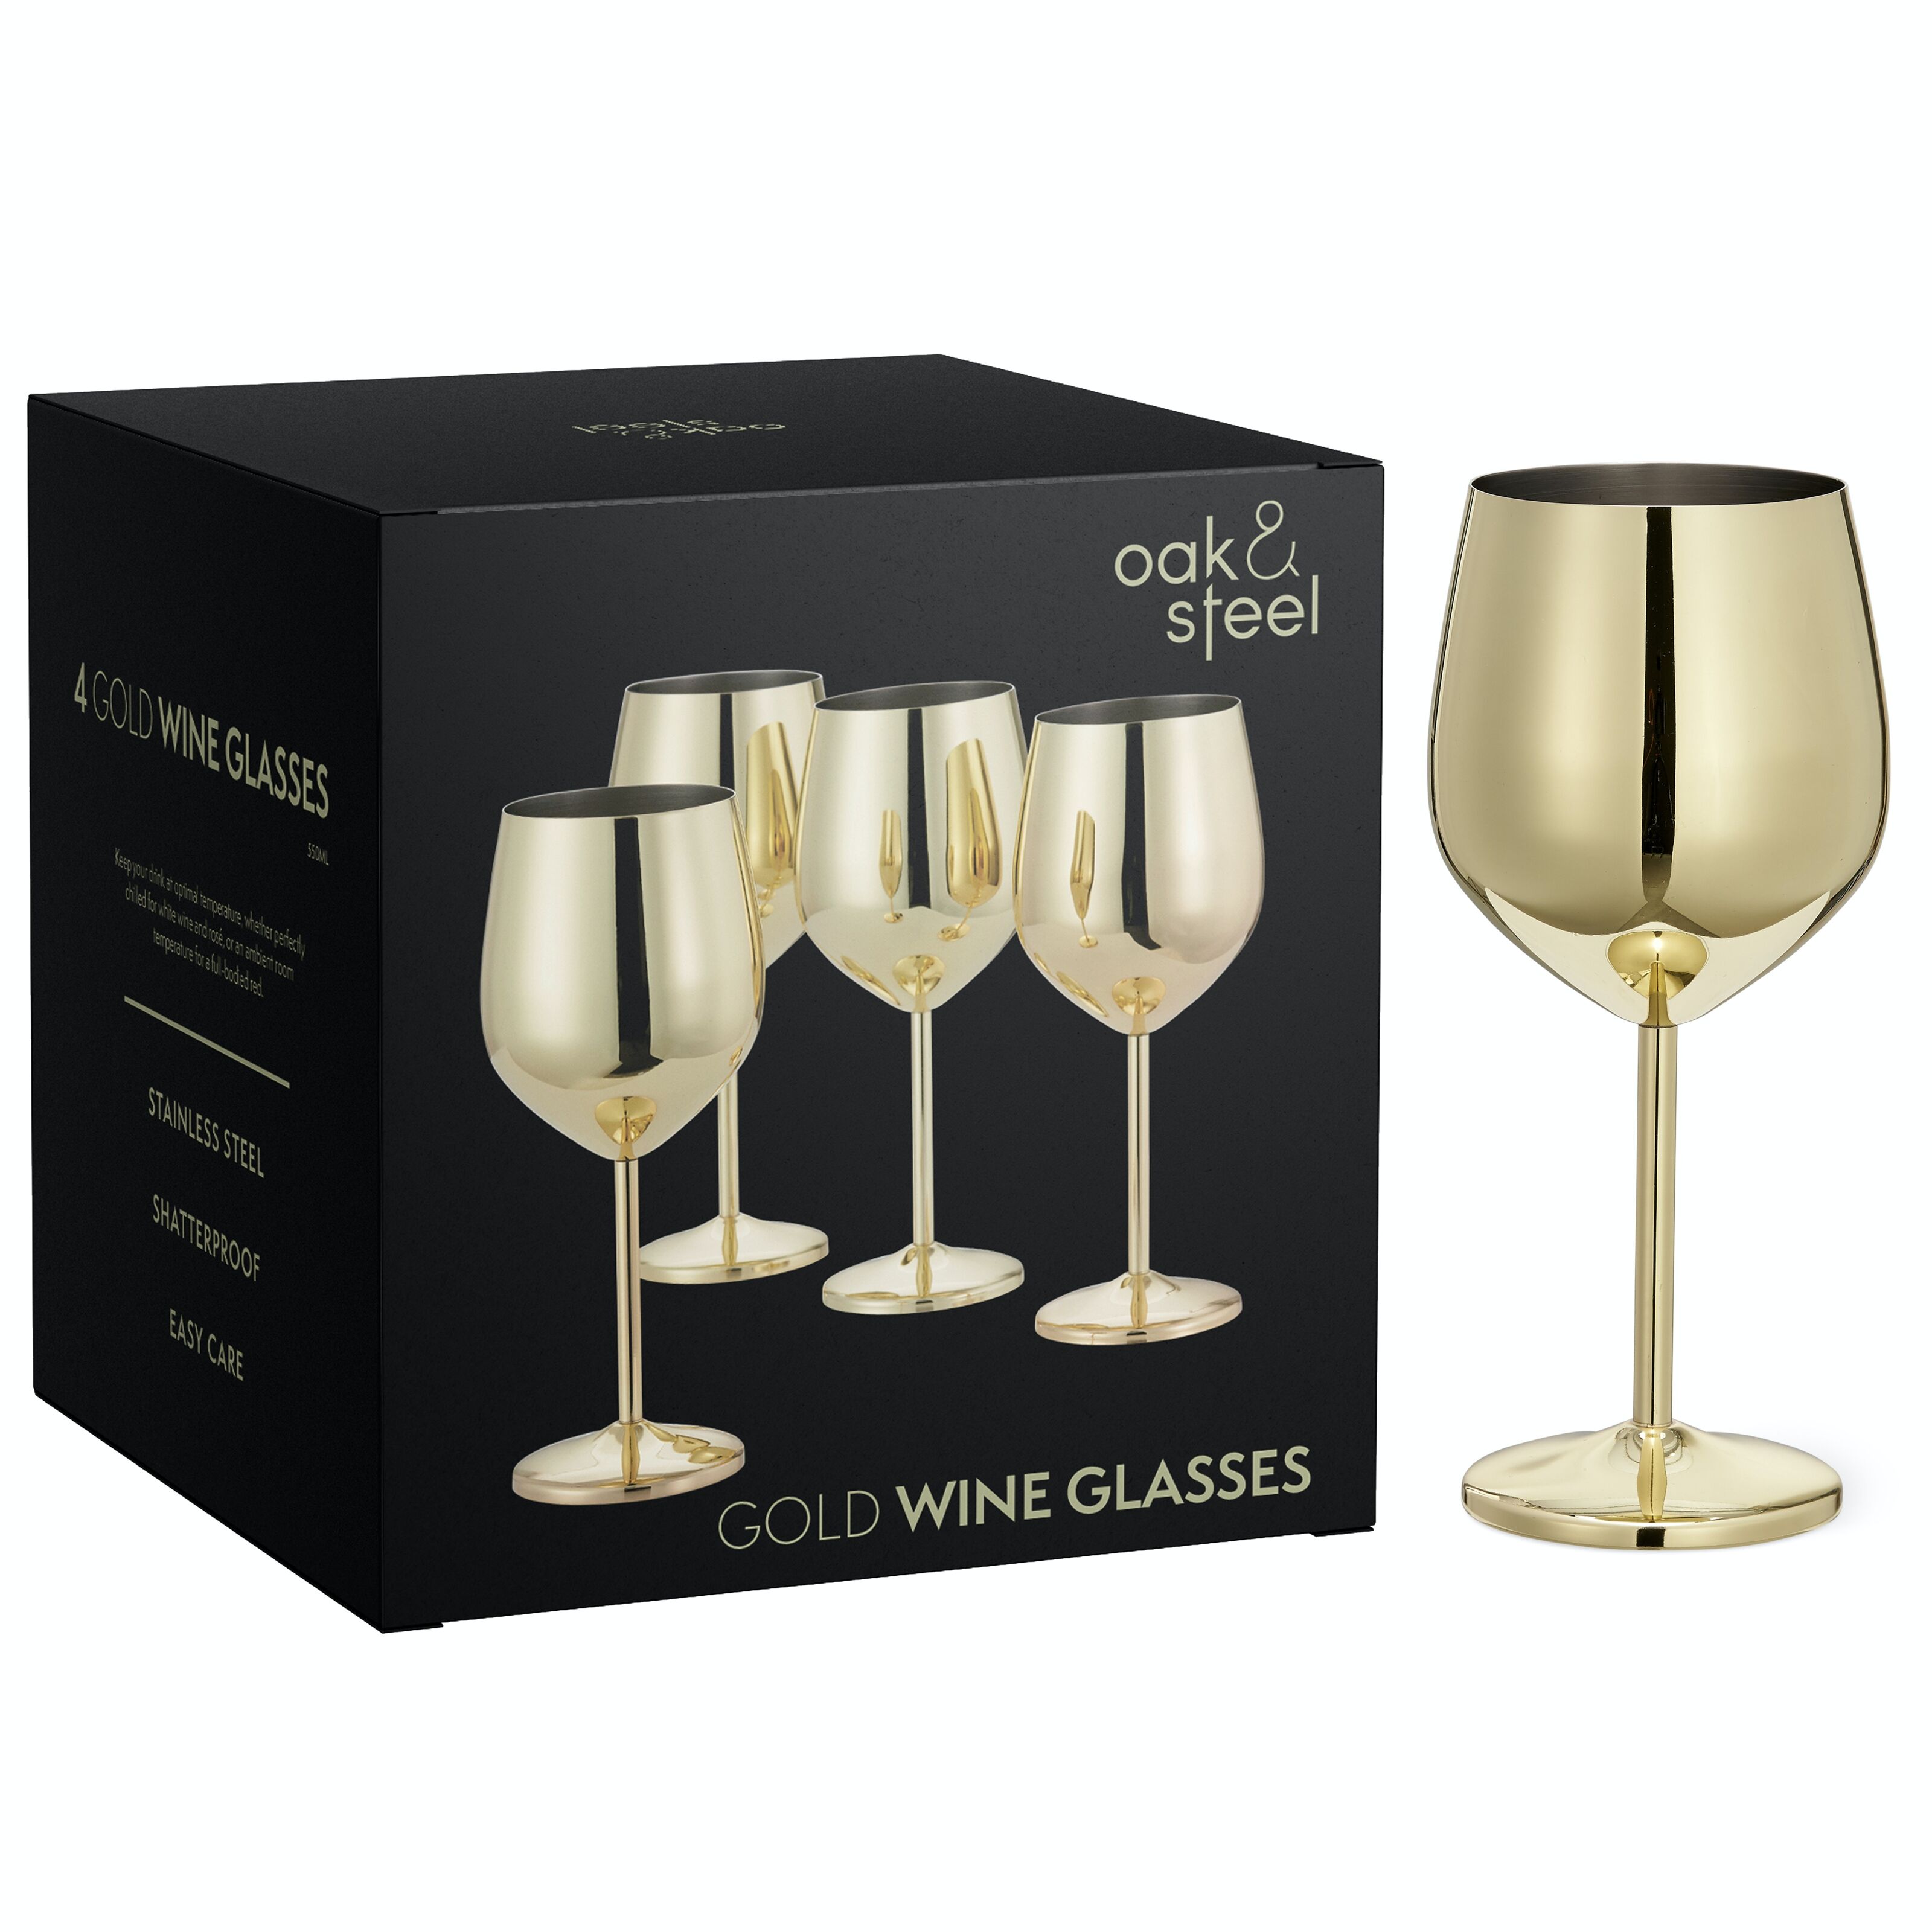 Where To Buy The Love Is Blind Gold Metal Wine Glasses